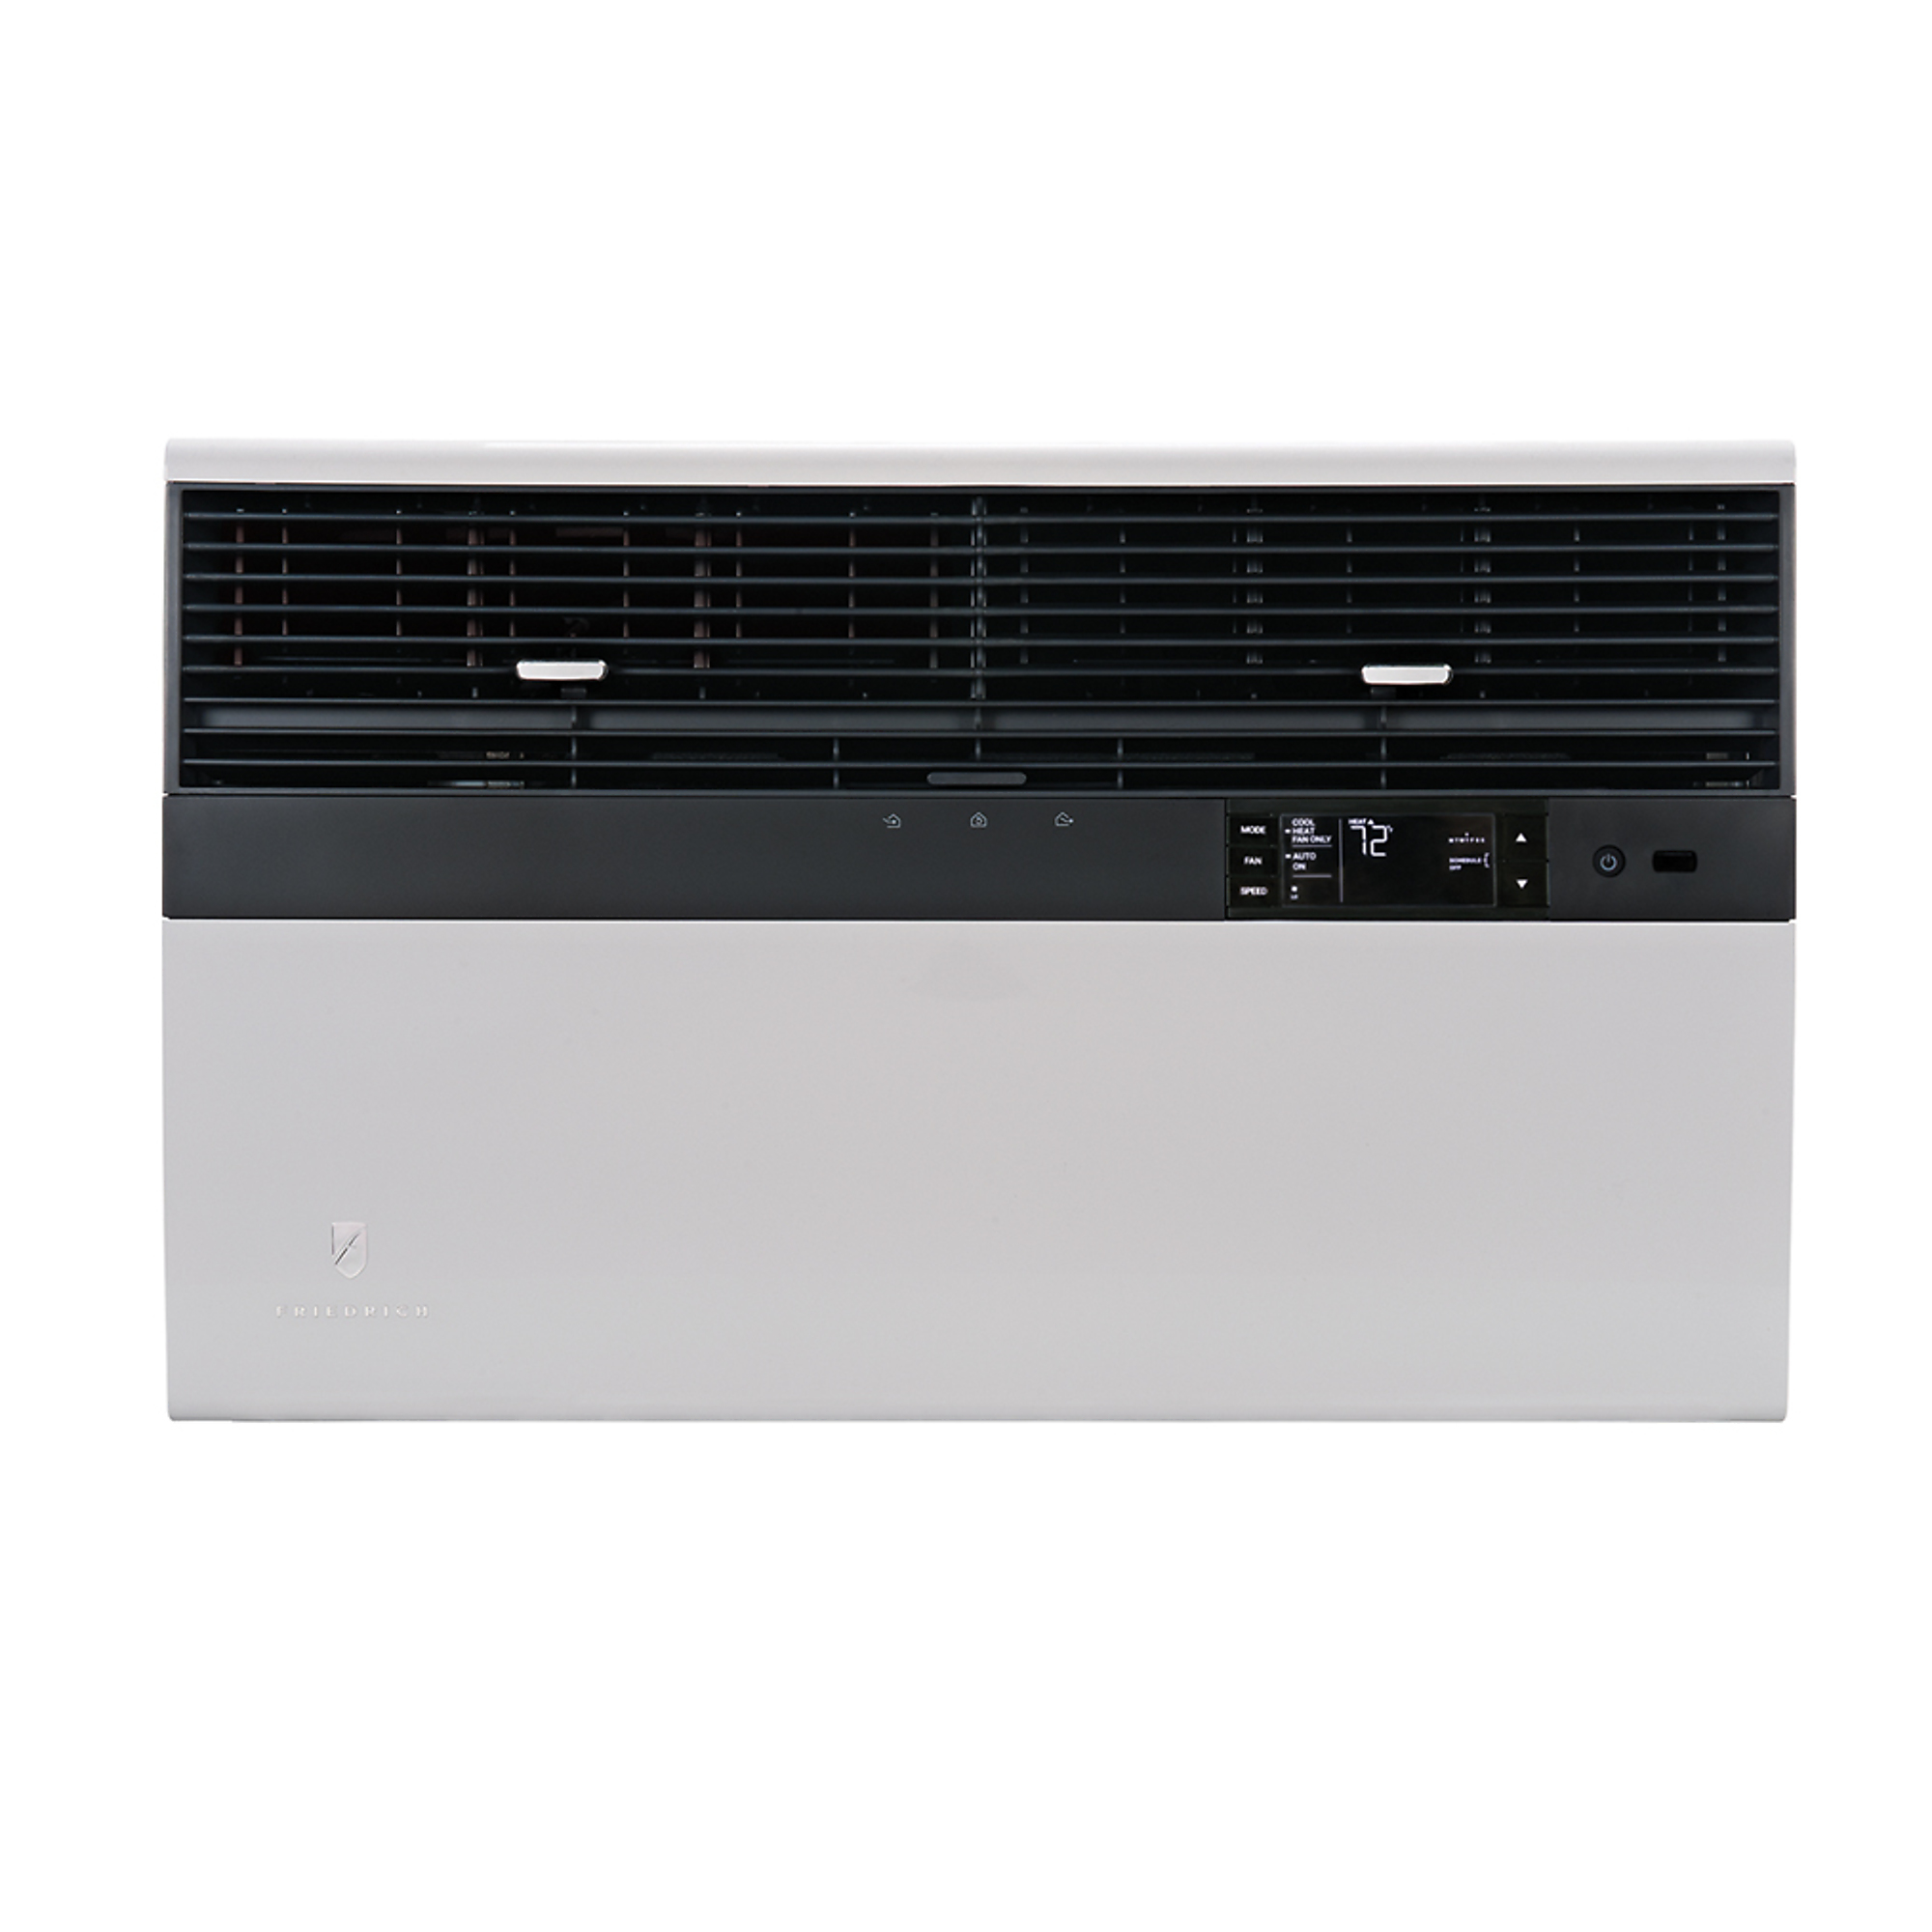 Friedrich KÜHL SERIES Window Wall Air Conditioner BTU Cooling 8000 Volts 115 Cooling Capacity 350 ft²